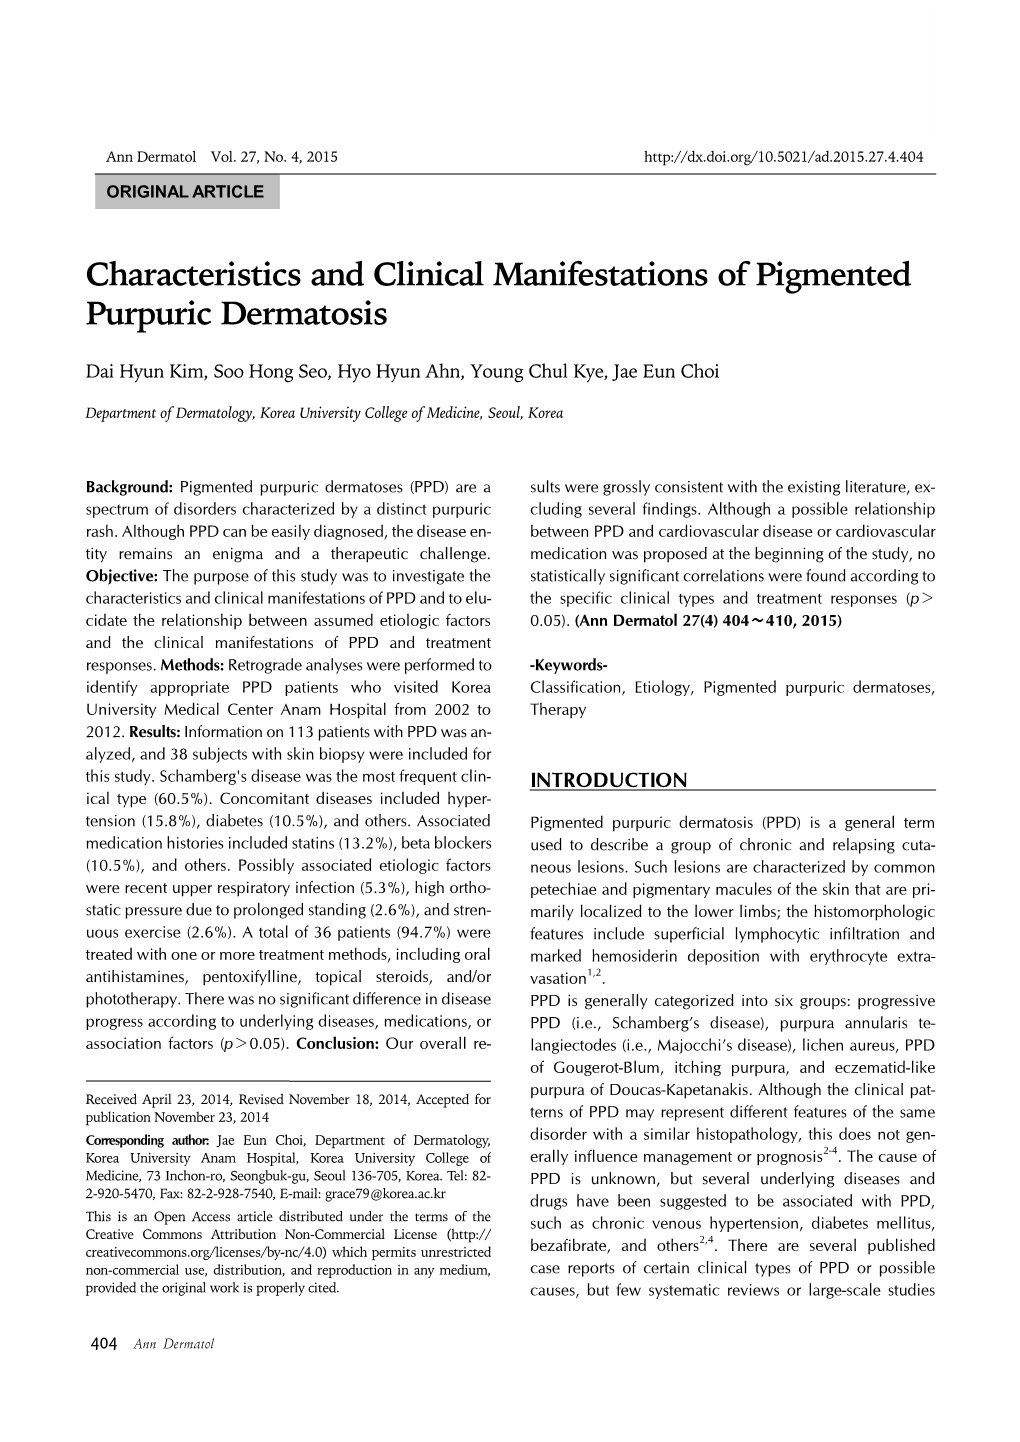 Characteristics and Clinical Manifestations of Pigmented Purpuric Dermatosis